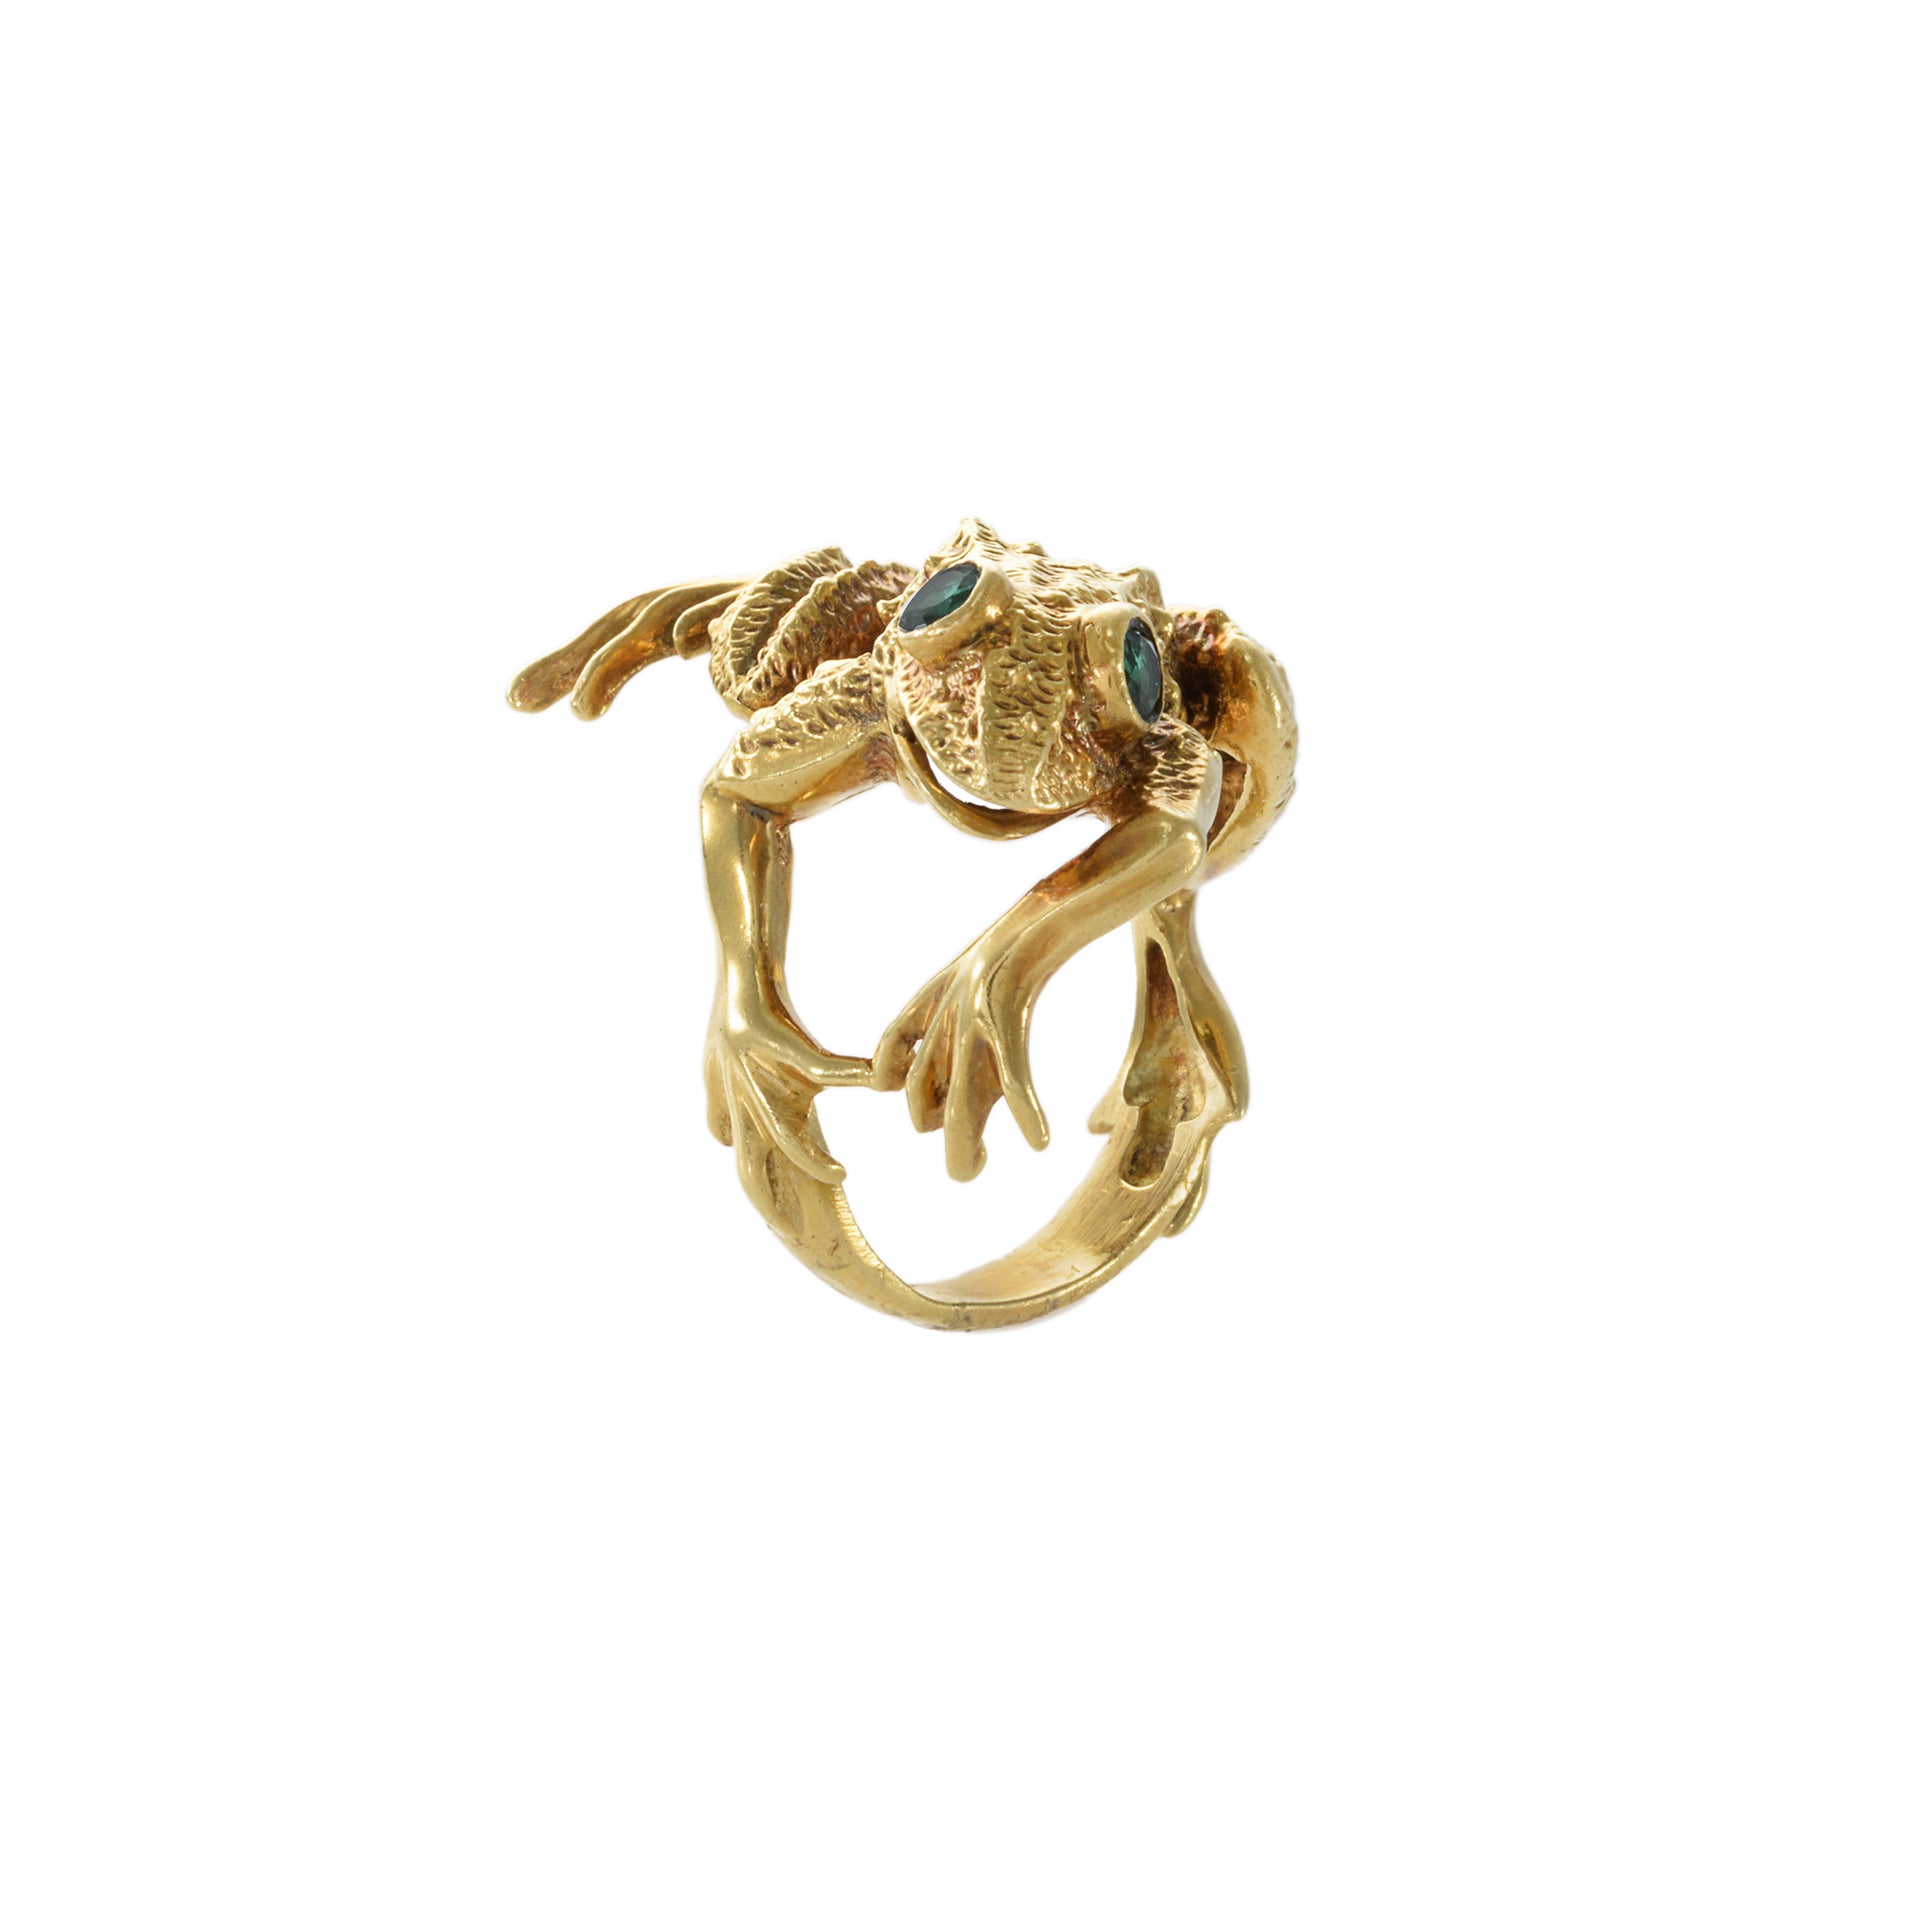 Vintage 18KT Yellow Gold Emerald Frog Ring